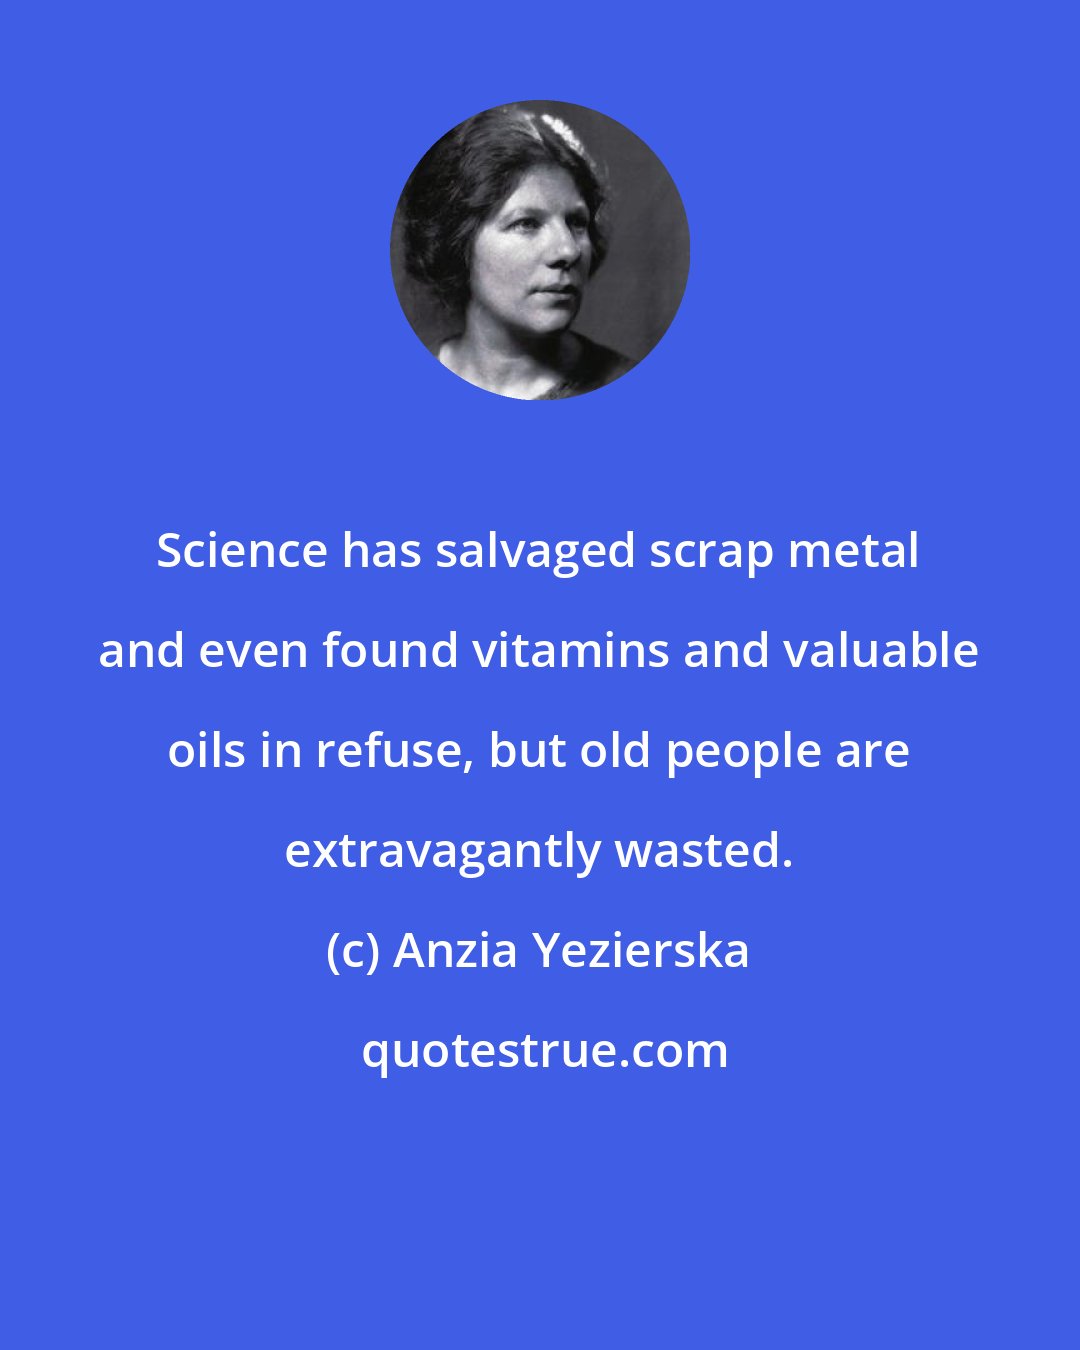 Anzia Yezierska: Science has salvaged scrap metal and even found vitamins and valuable oils in refuse, but old people are extravagantly wasted.